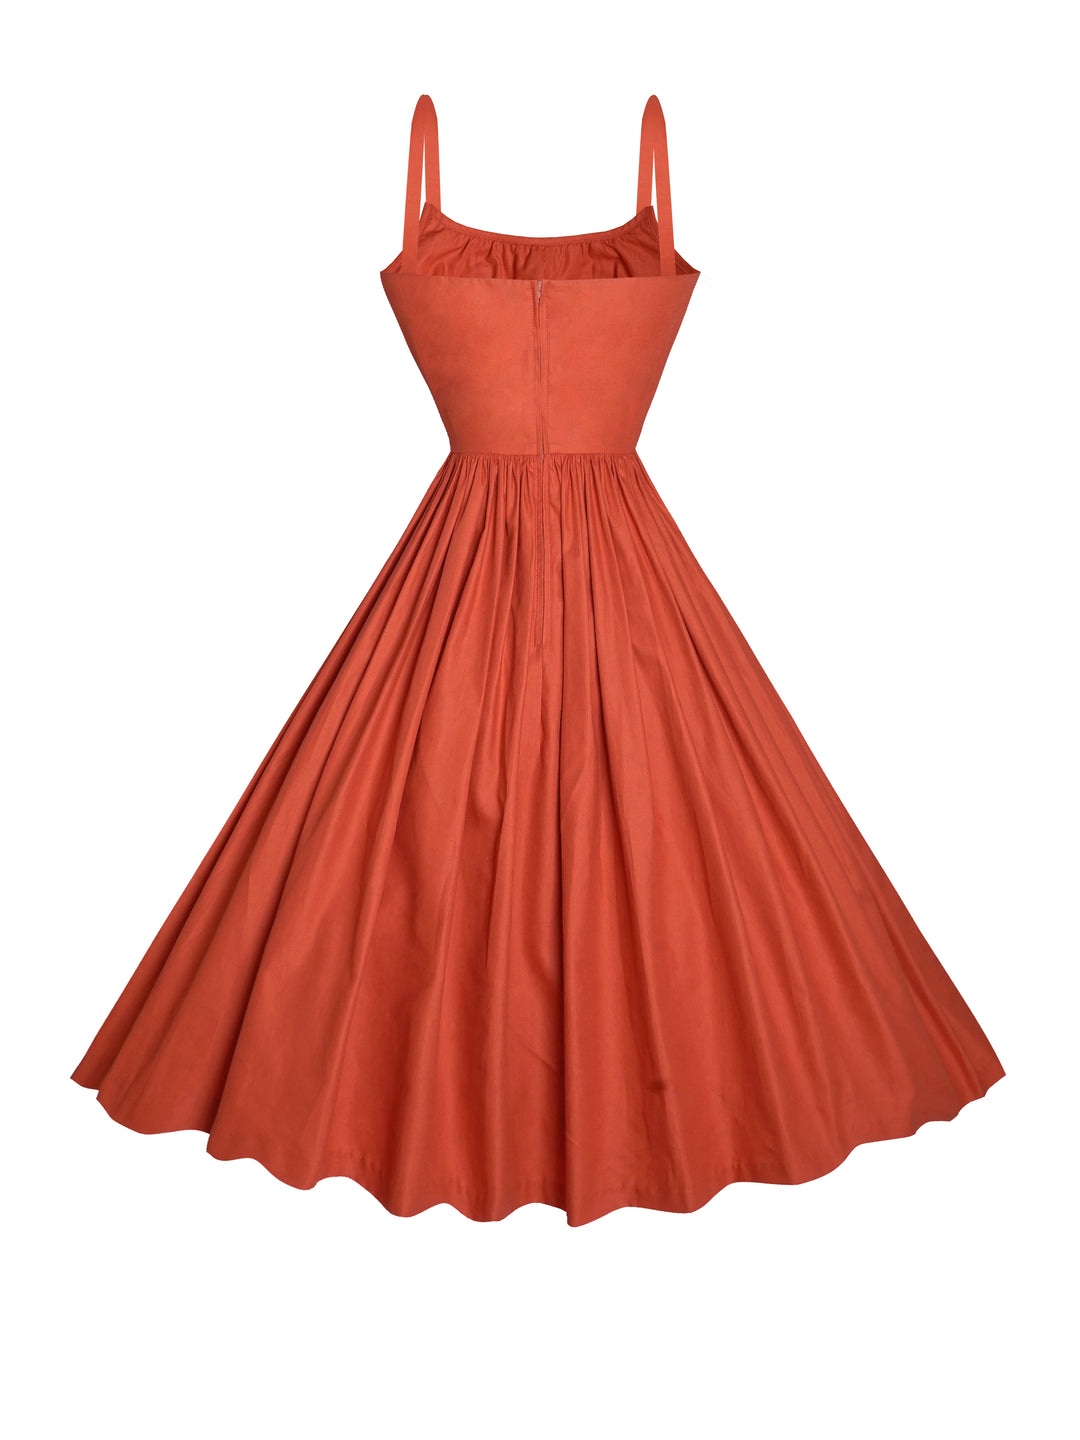 MTO - Grace Dress in Rustic Red Cotton